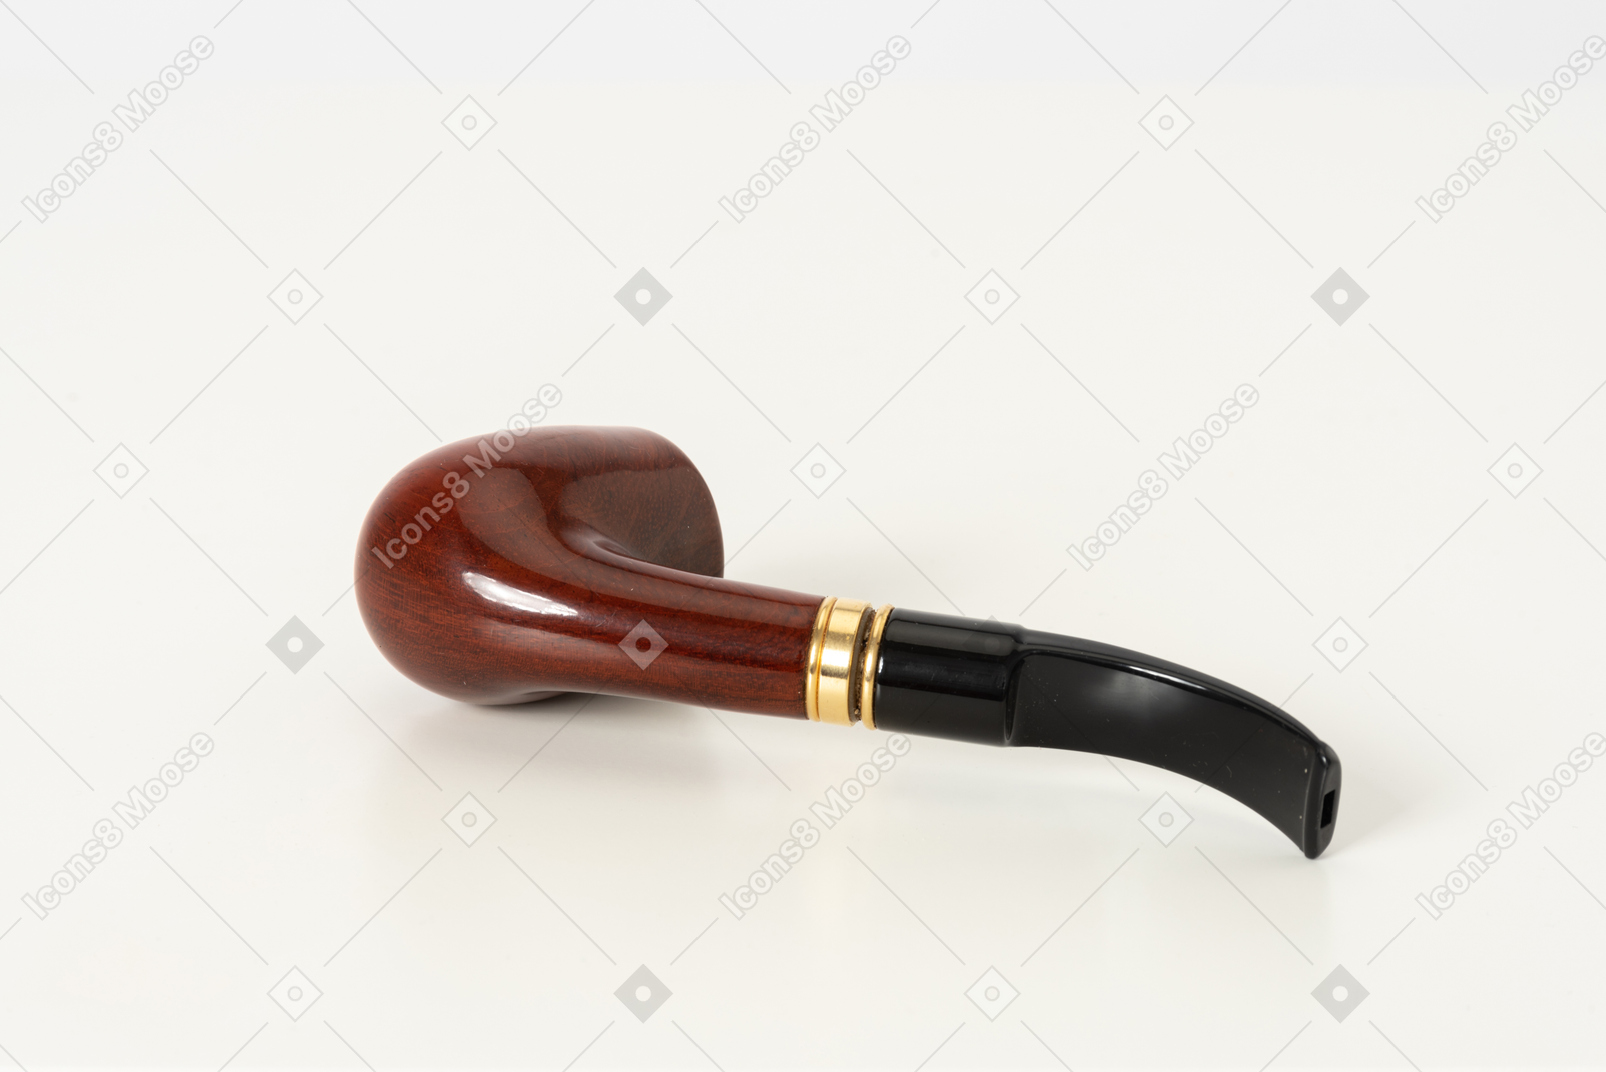 Smoking pipe on a white background